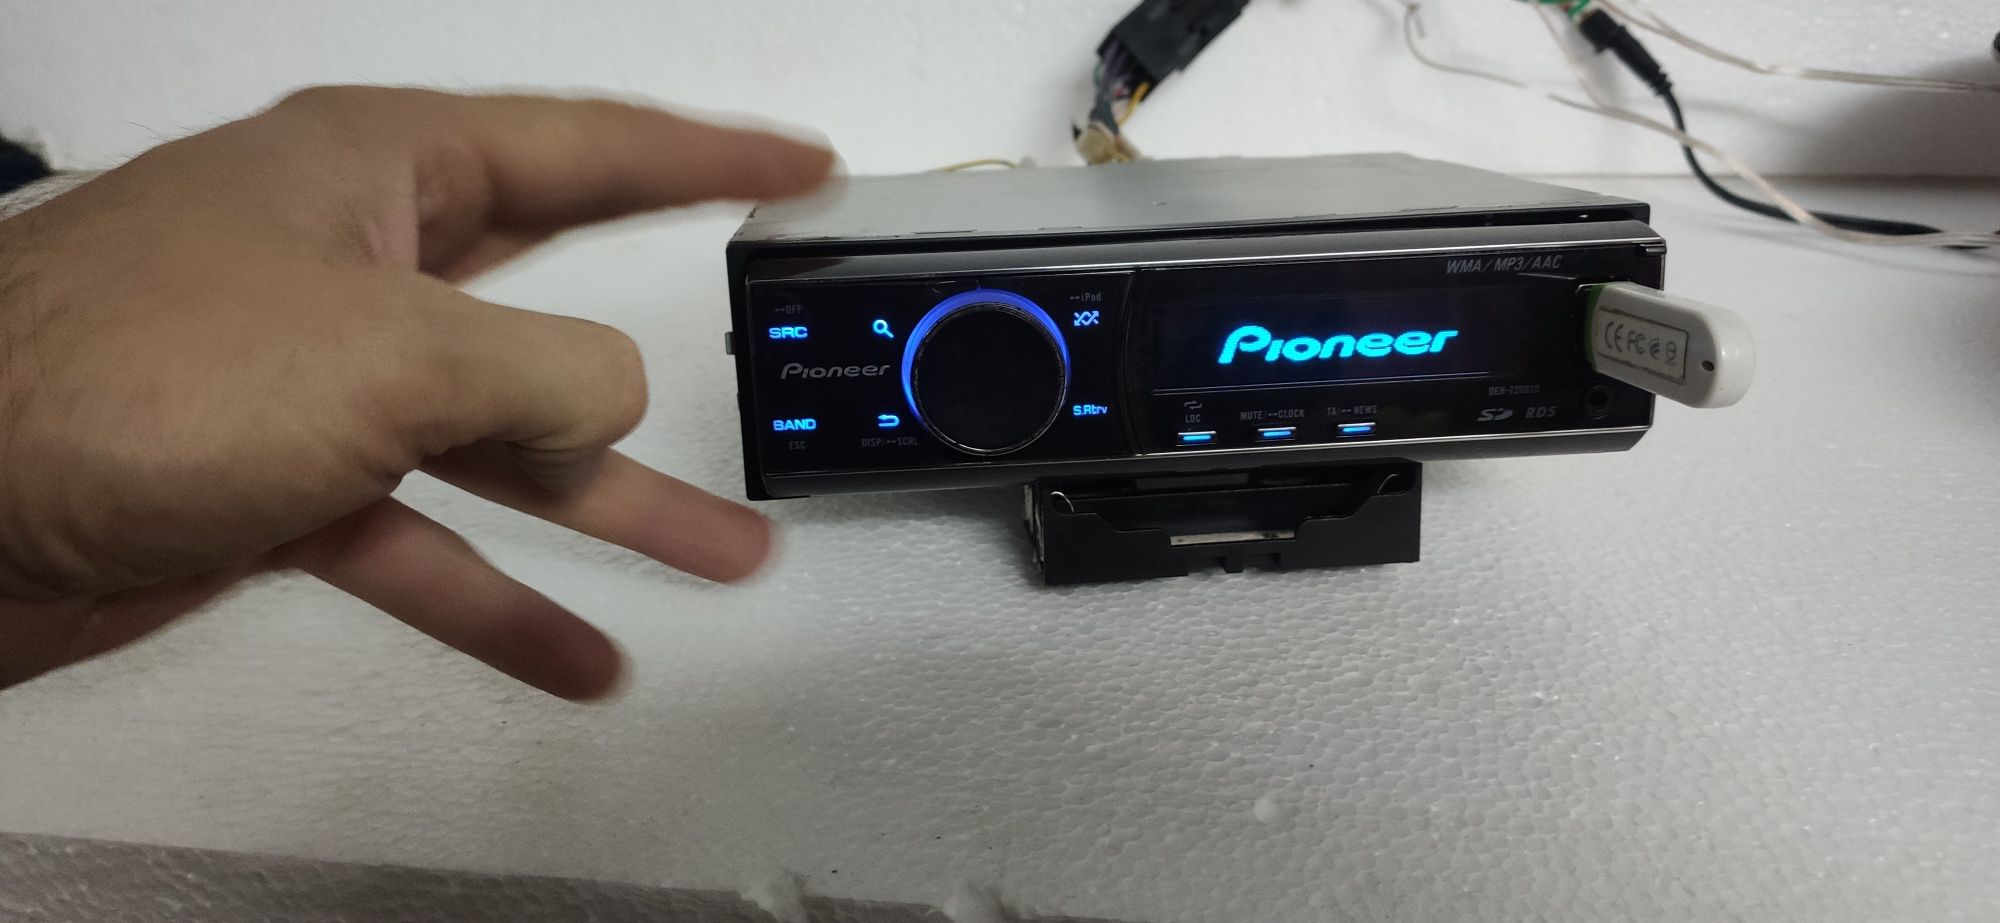 Pioneer deh 7200sd